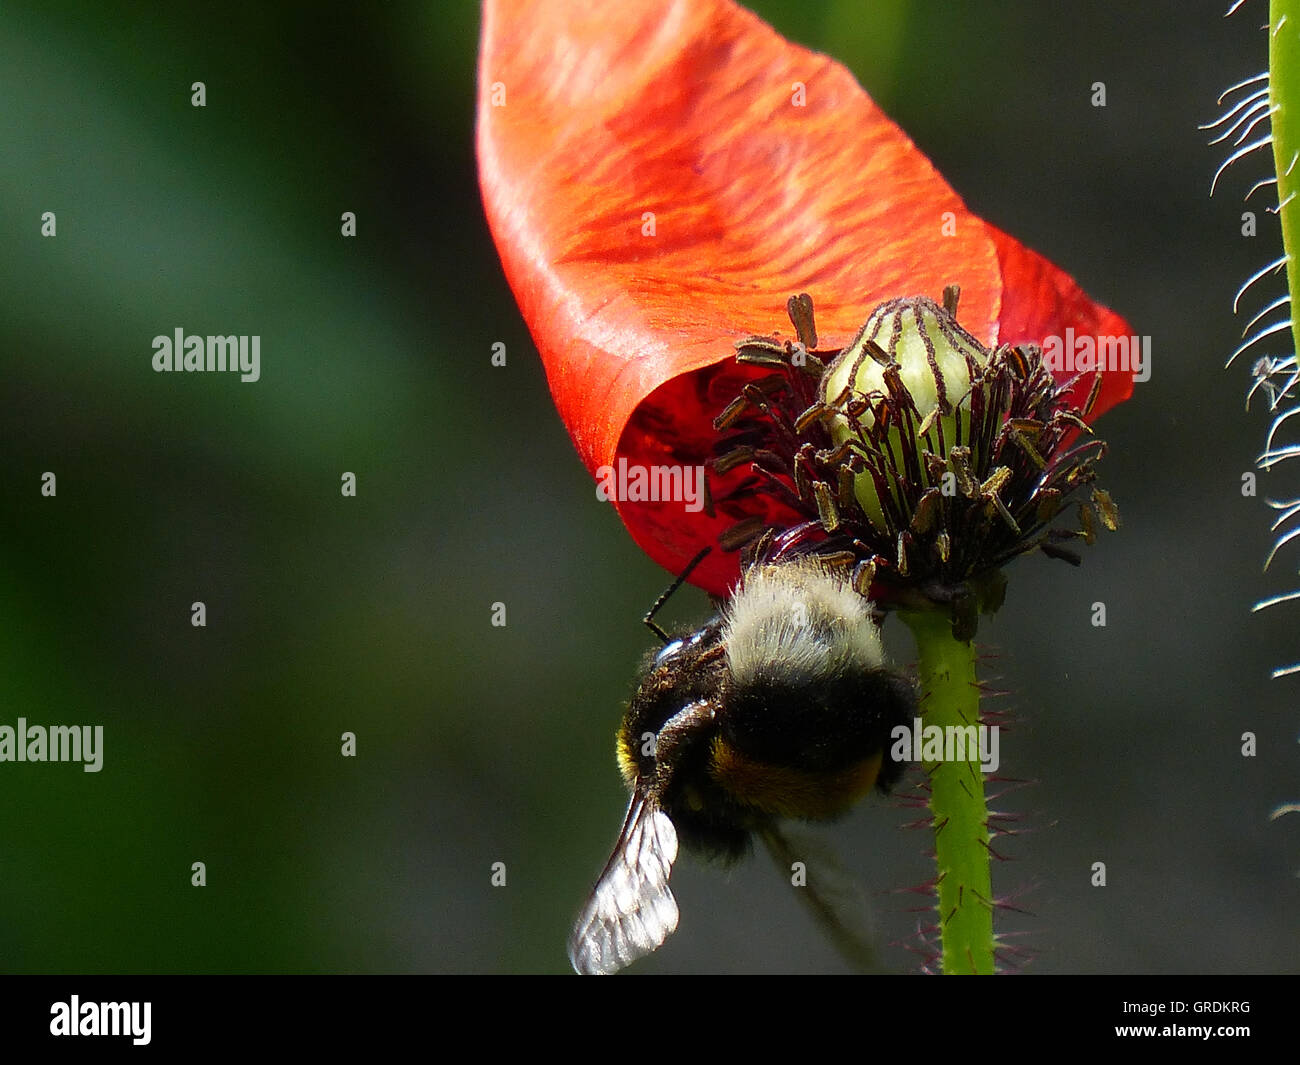 Bumblebee Gets Nectar From Flowering Red Poppy, Dark Green Background Stock Photo